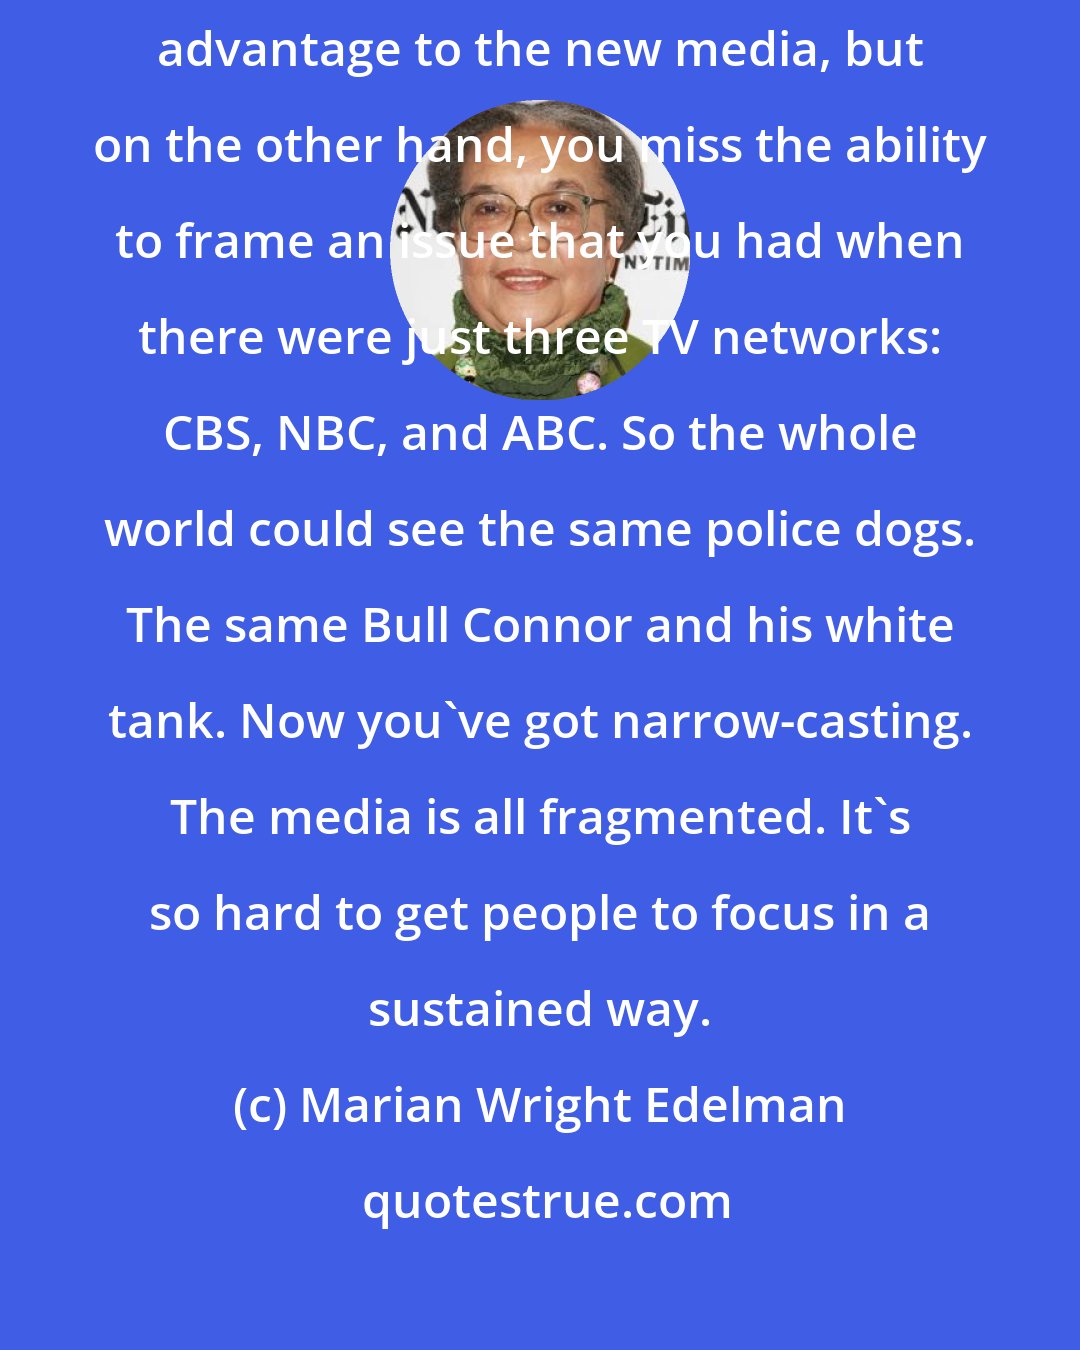 Marian Wright Edelman: When I started out as an activist, the issues were much clearer. There's advantage to the new media, but on the other hand, you miss the ability to frame an issue that you had when there were just three TV networks: CBS, NBC, and ABC. So the whole world could see the same police dogs. The same Bull Connor and his white tank. Now you've got narrow-casting. The media is all fragmented. It's so hard to get people to focus in a sustained way.